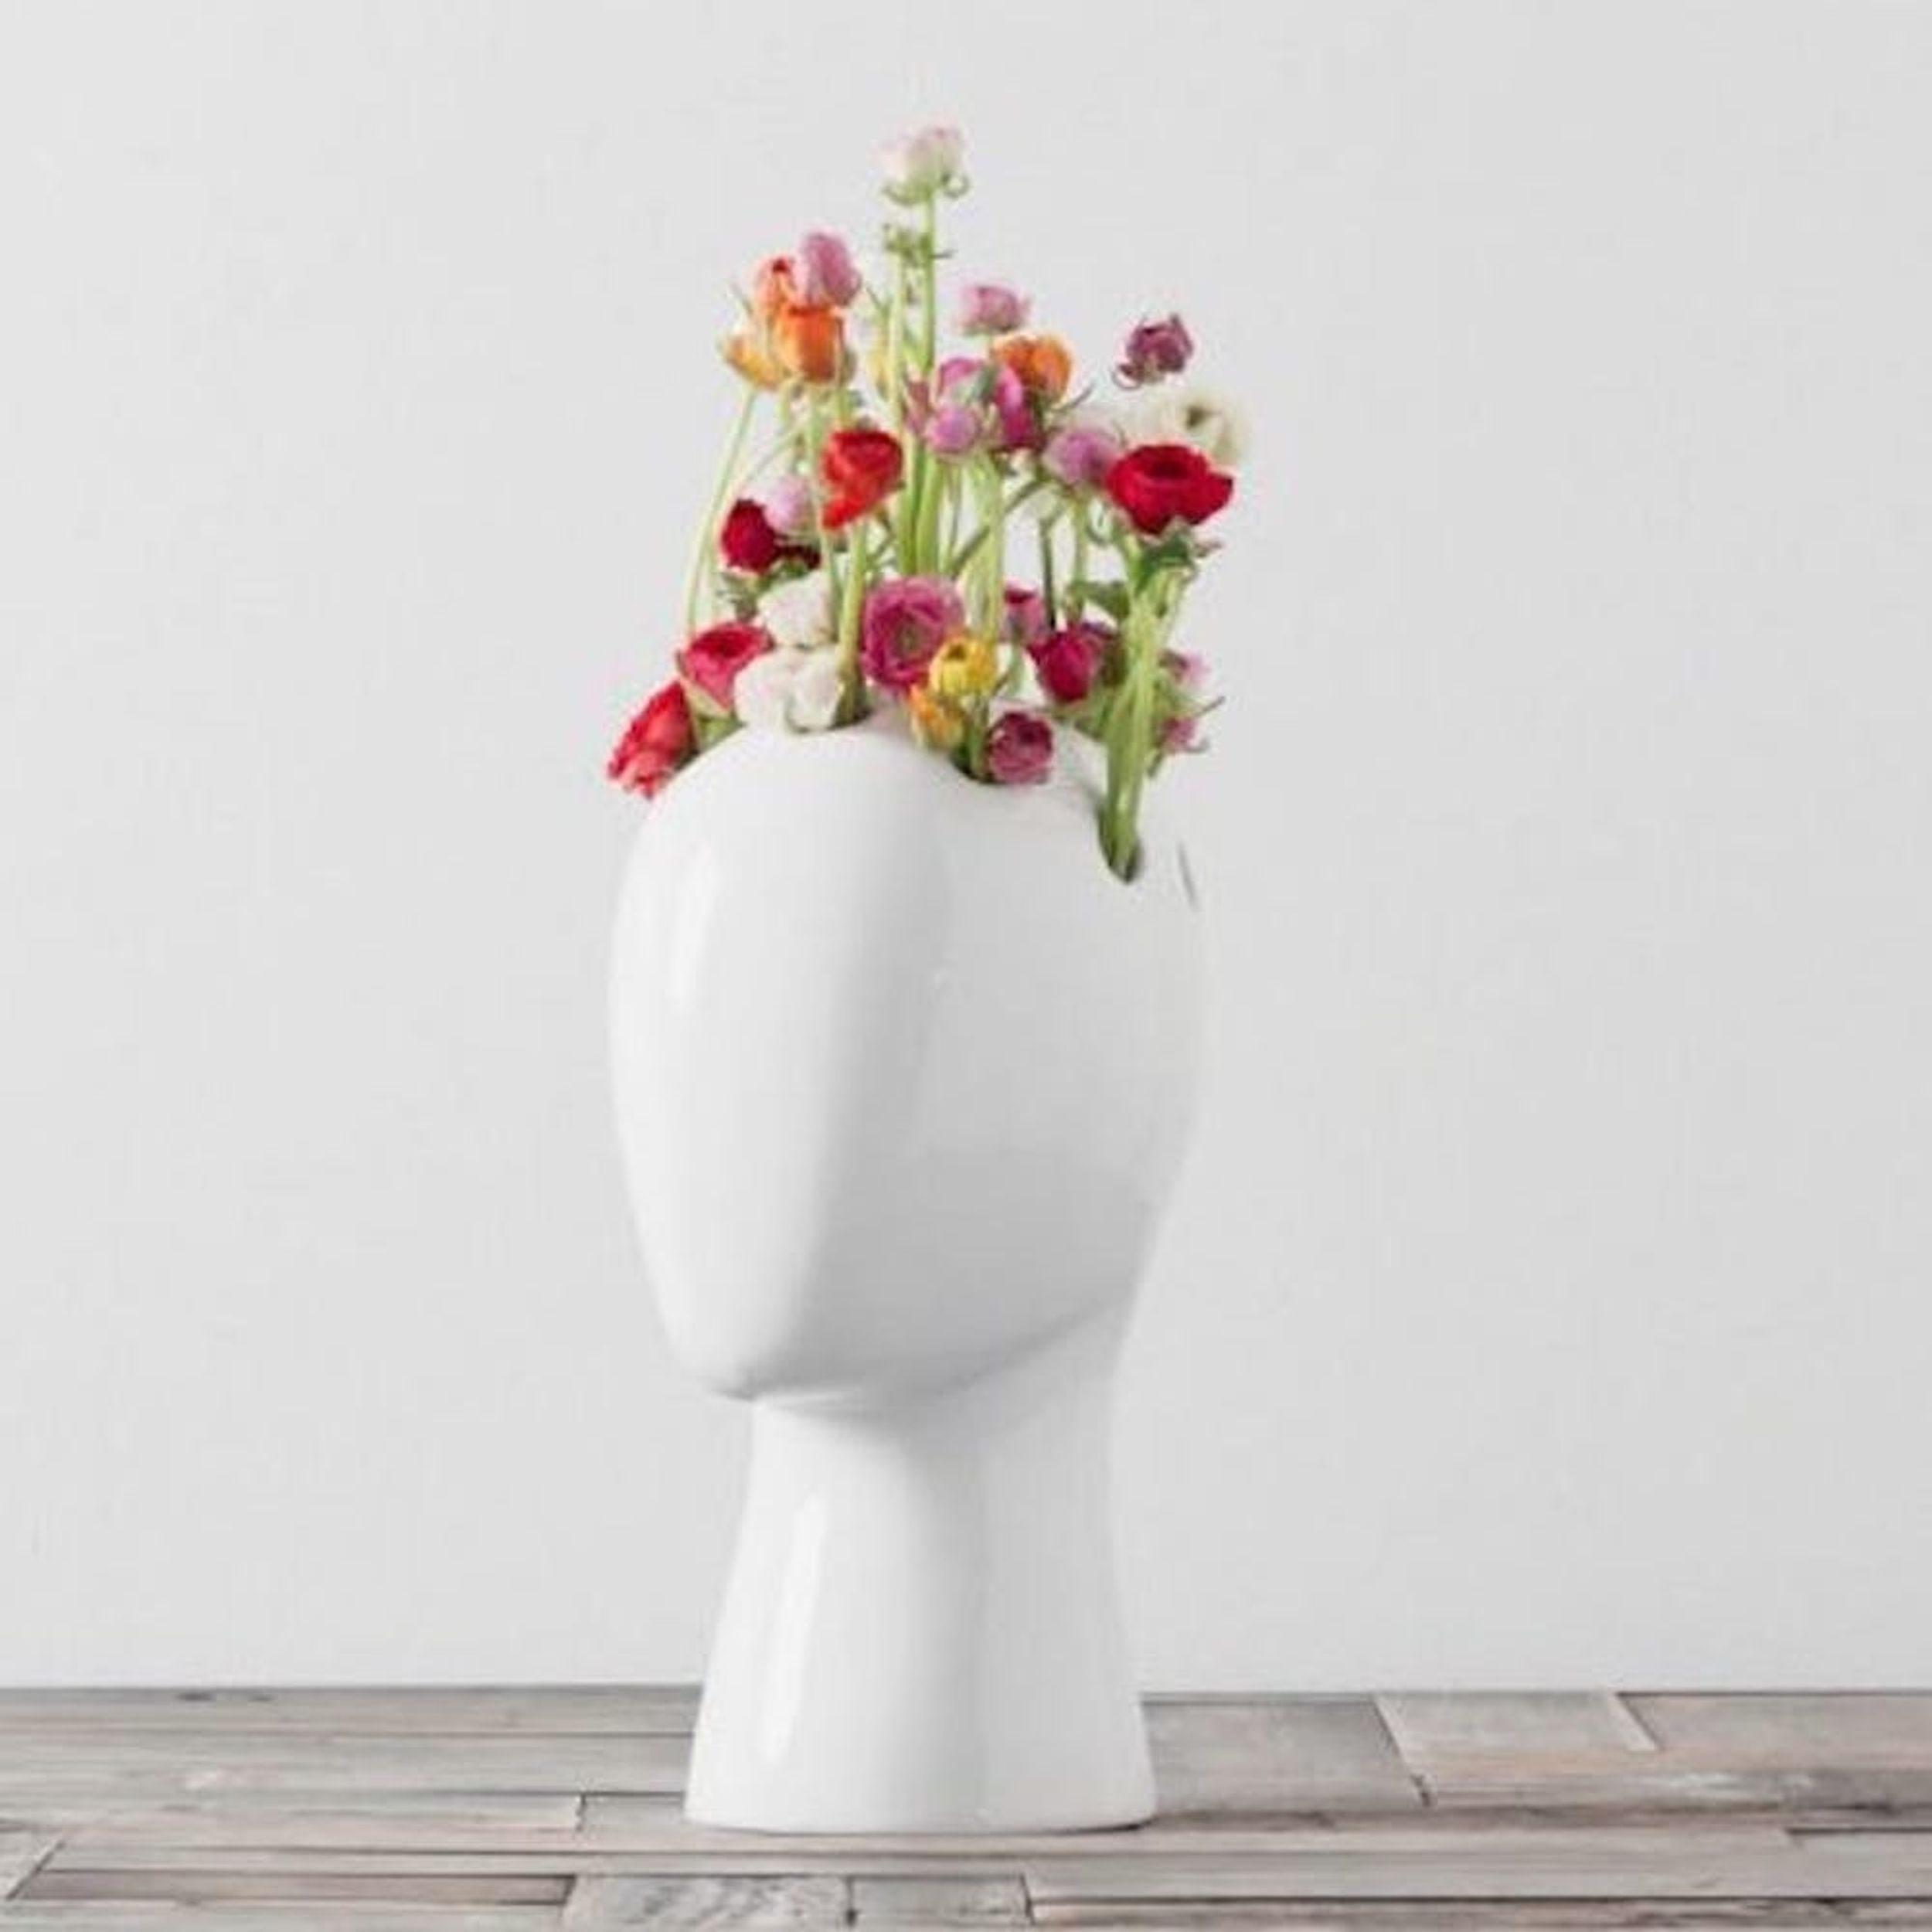 This Modern Vase Is the New Chia Pet You Need for Your Home